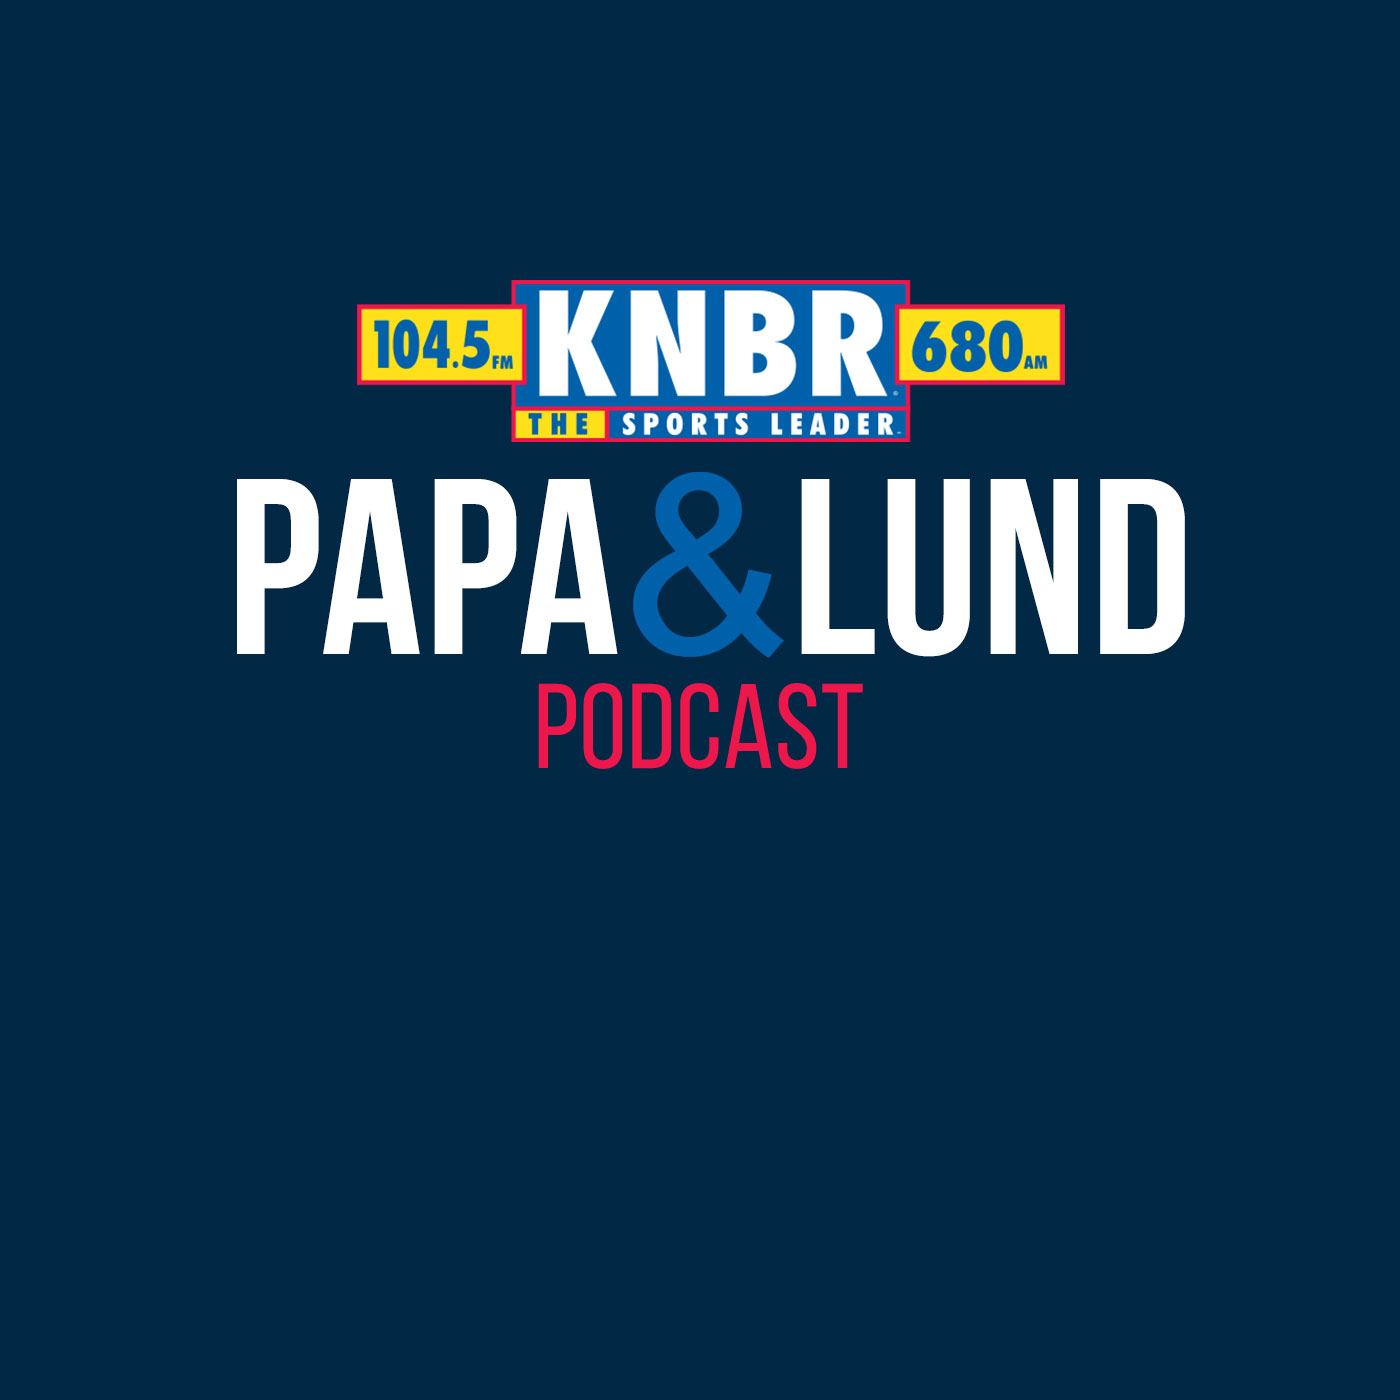 2-11 Cooper Rush joins Papa & Lund to preview Super Bowl LVI